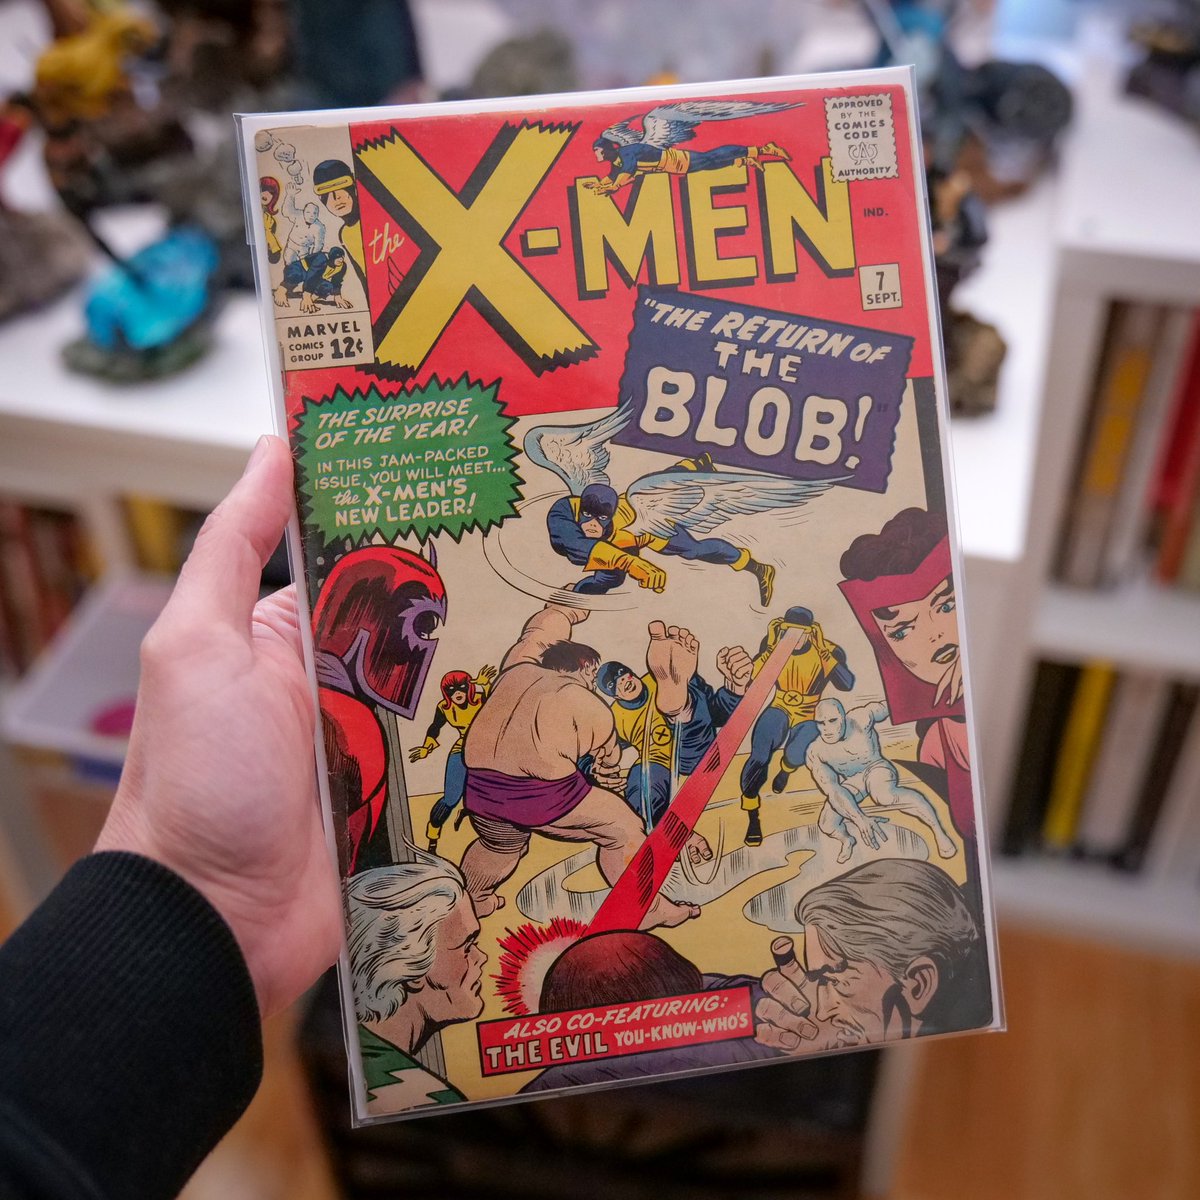 Sweet deal on this! Looks so much better in person than it did in the photos ❤️

And it smells awesome 🙃

#uncannyxmen #blob